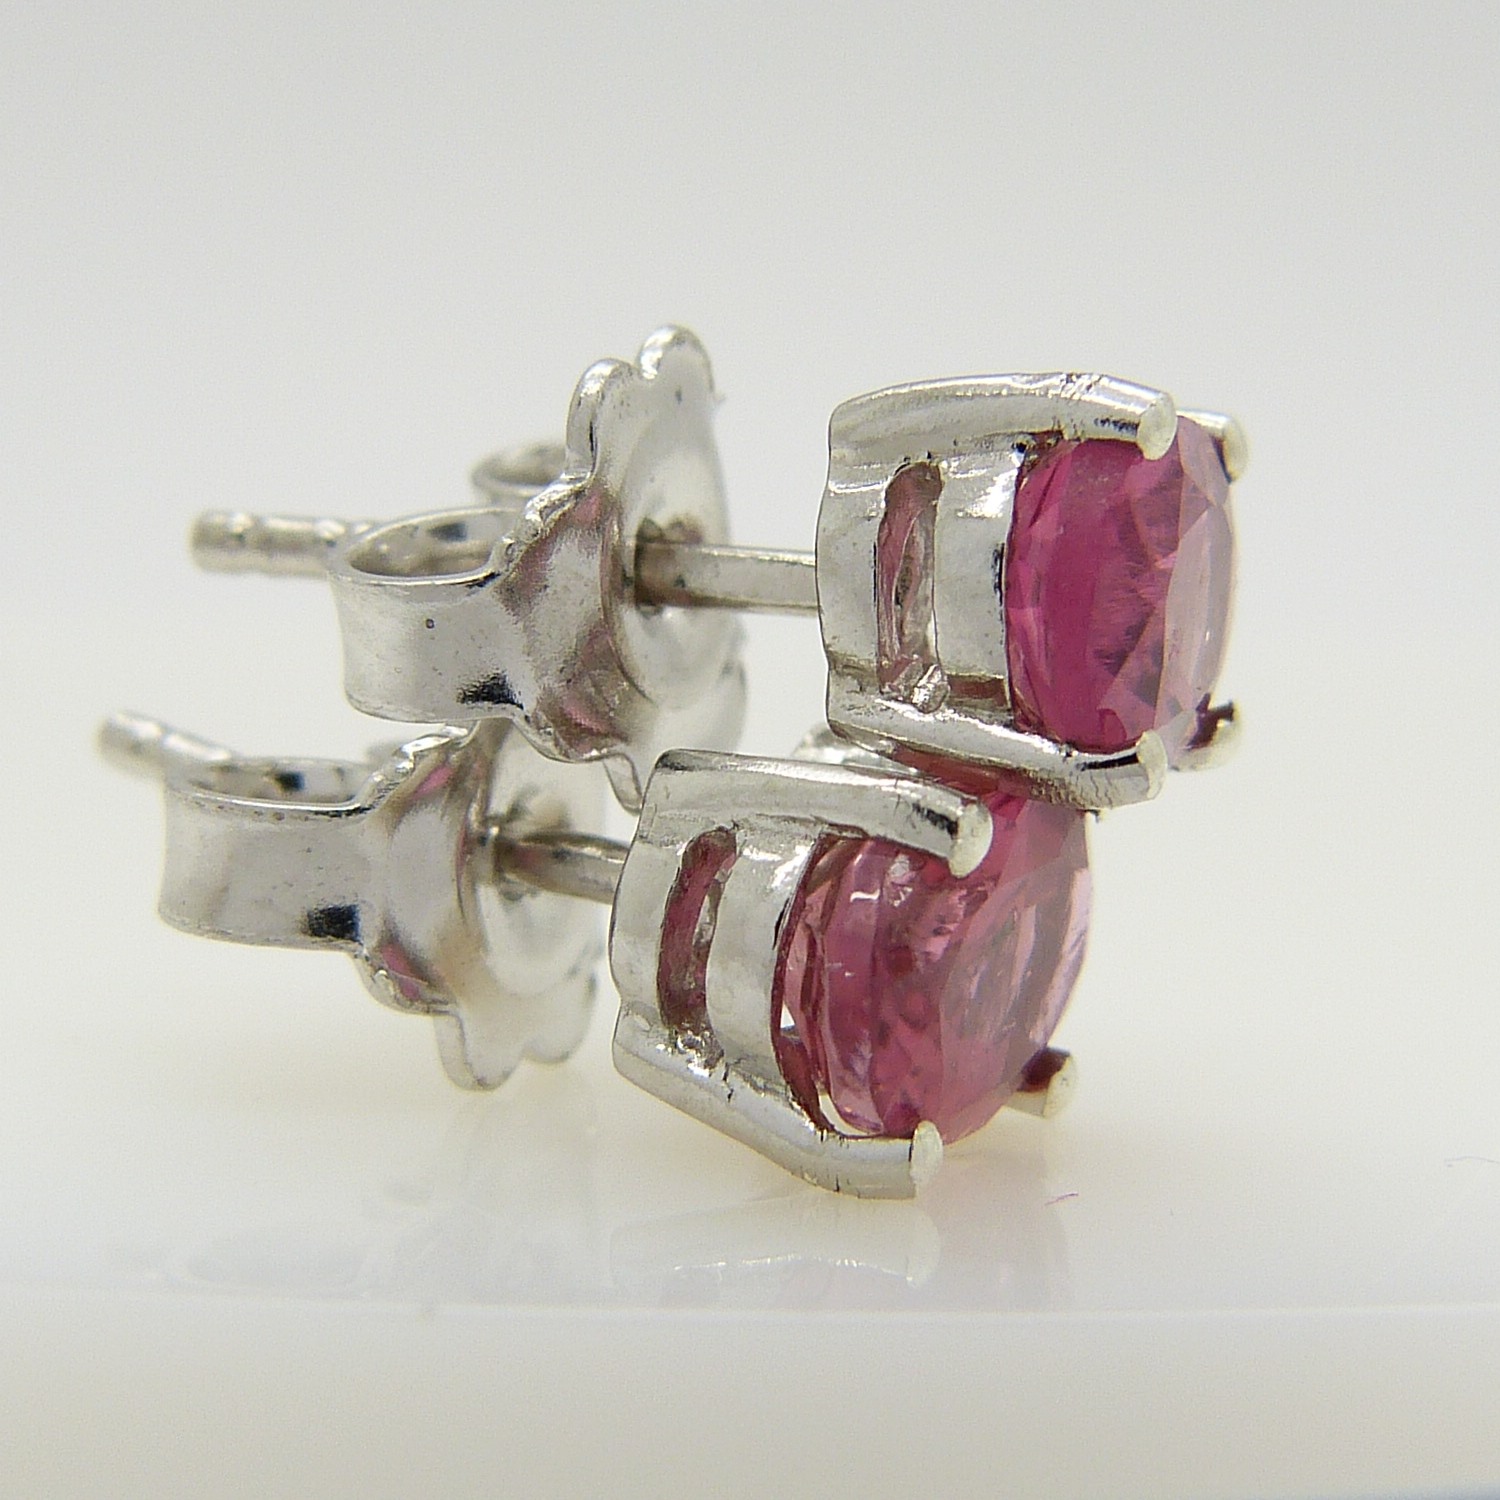 A pair of silver ear studs set with pink tourmalines, 1.30 carats (approx). - Image 4 of 5